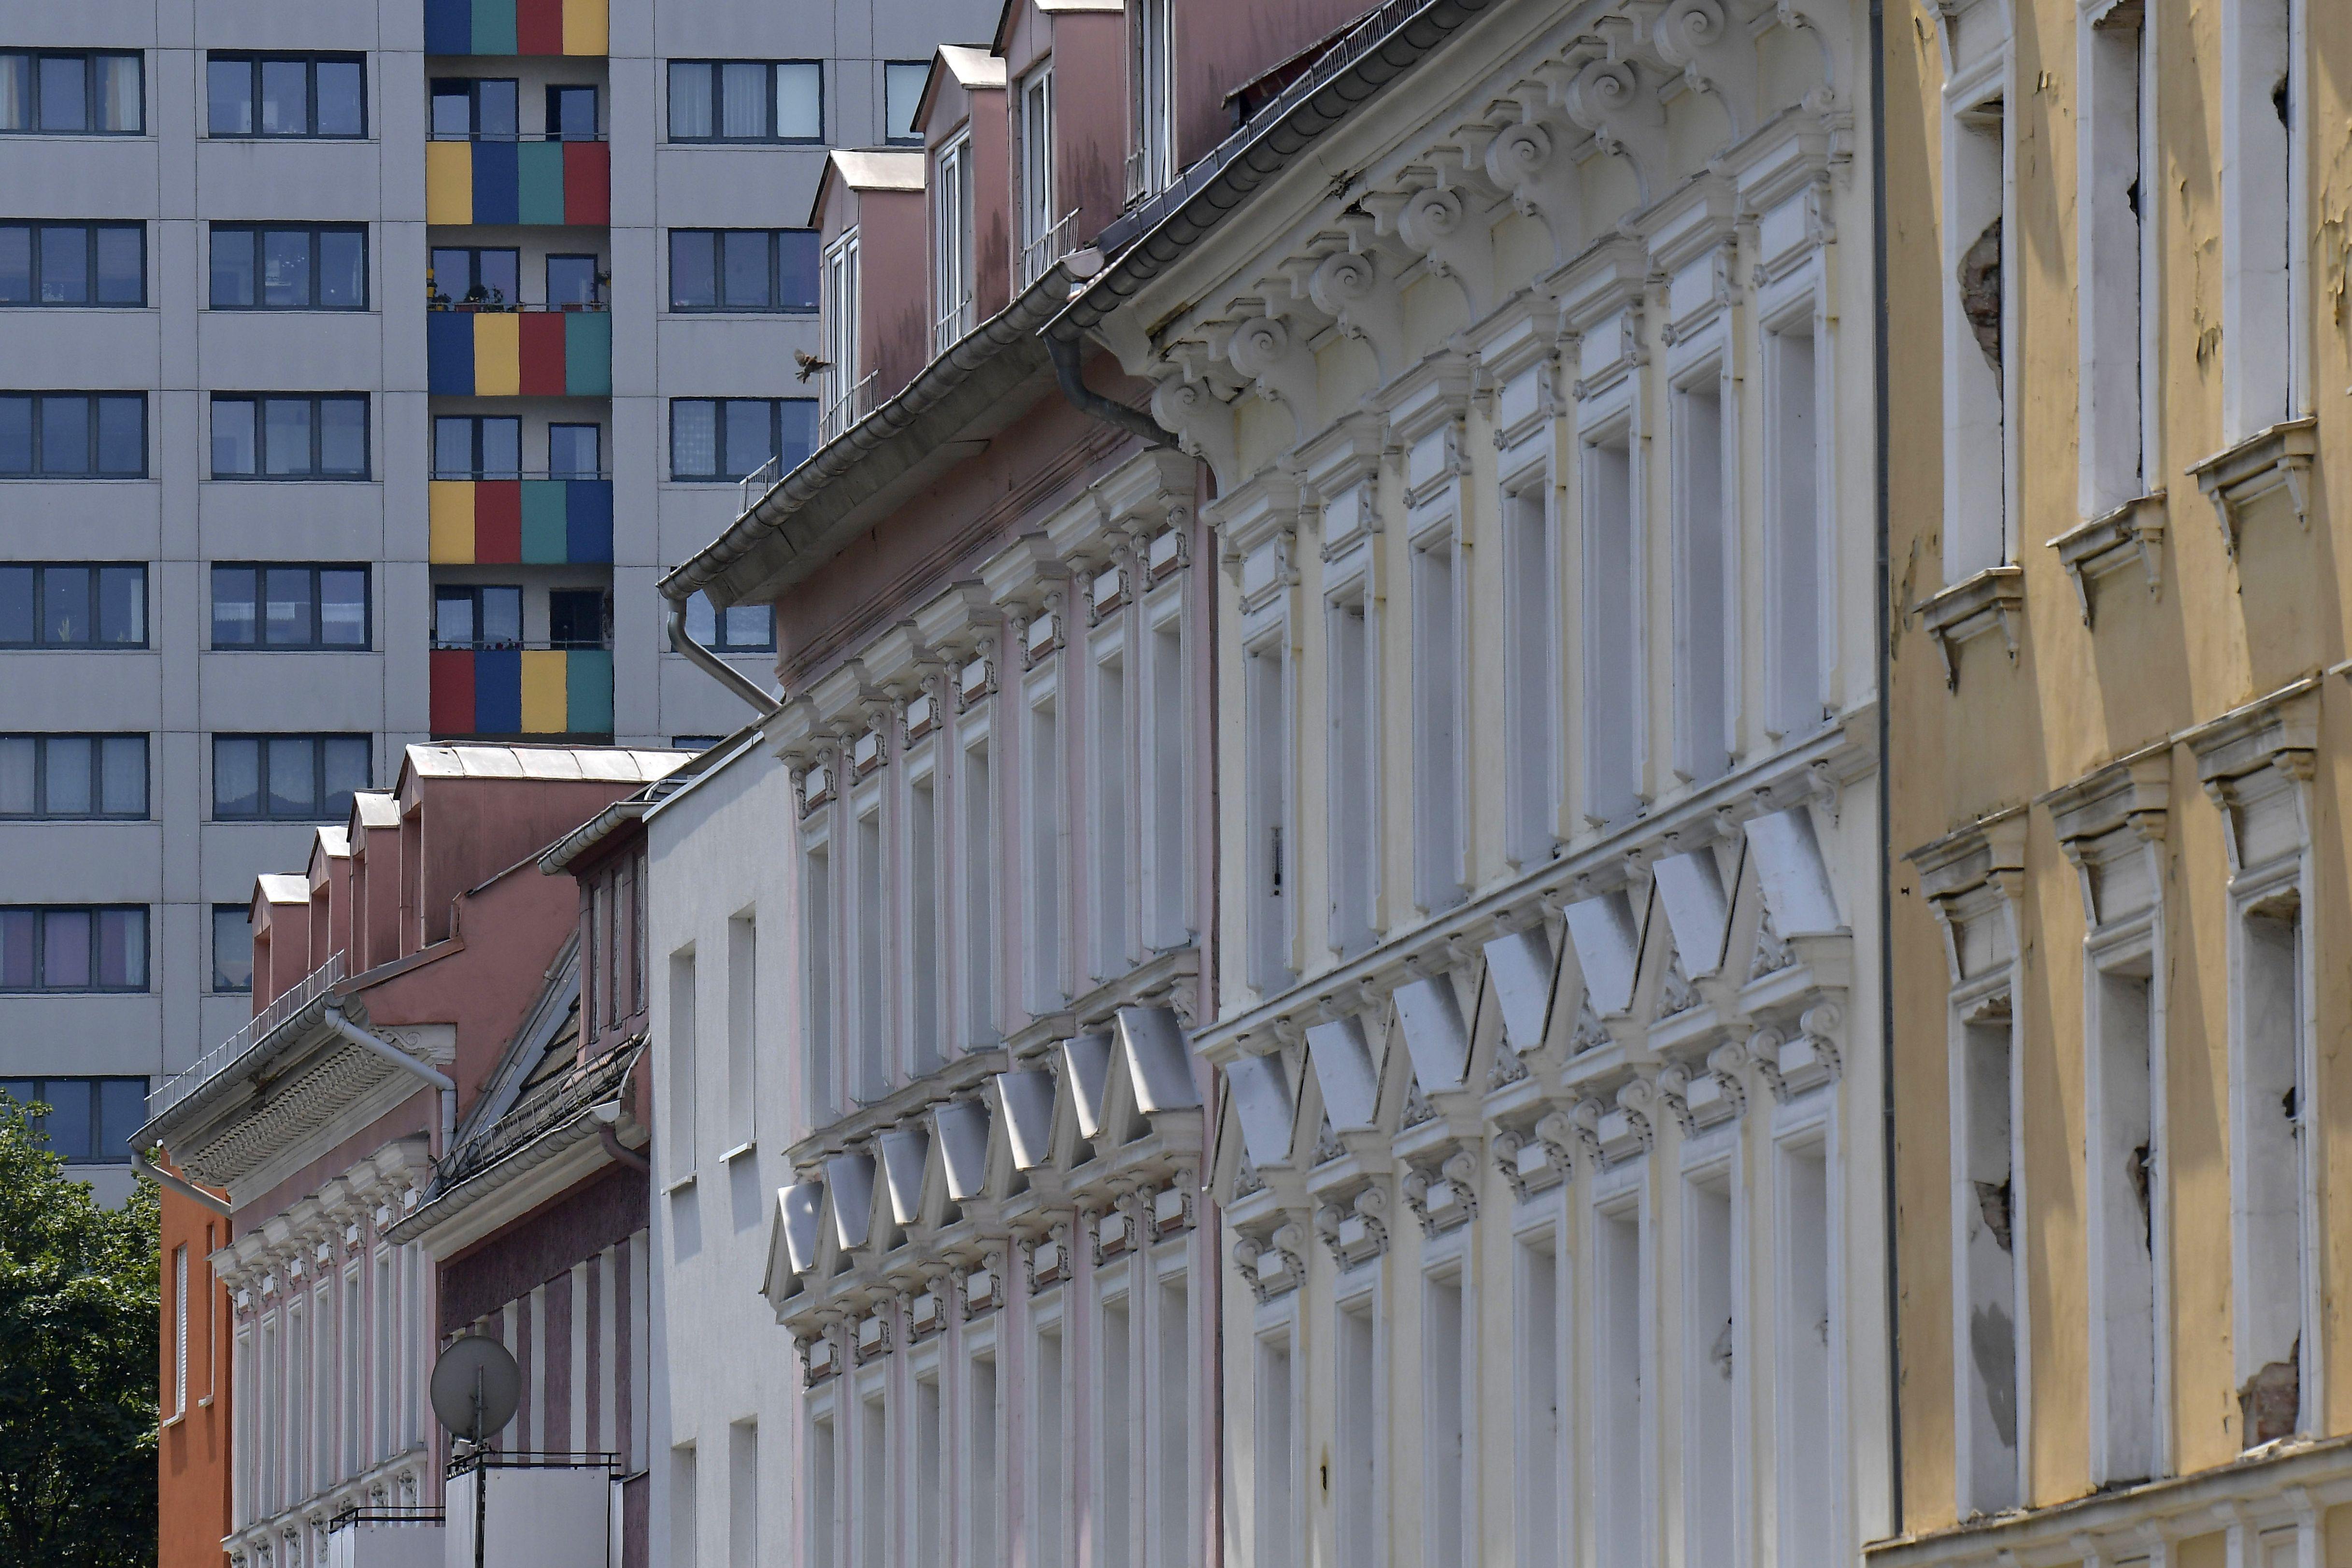 The facades of residential buildings in Berlin.